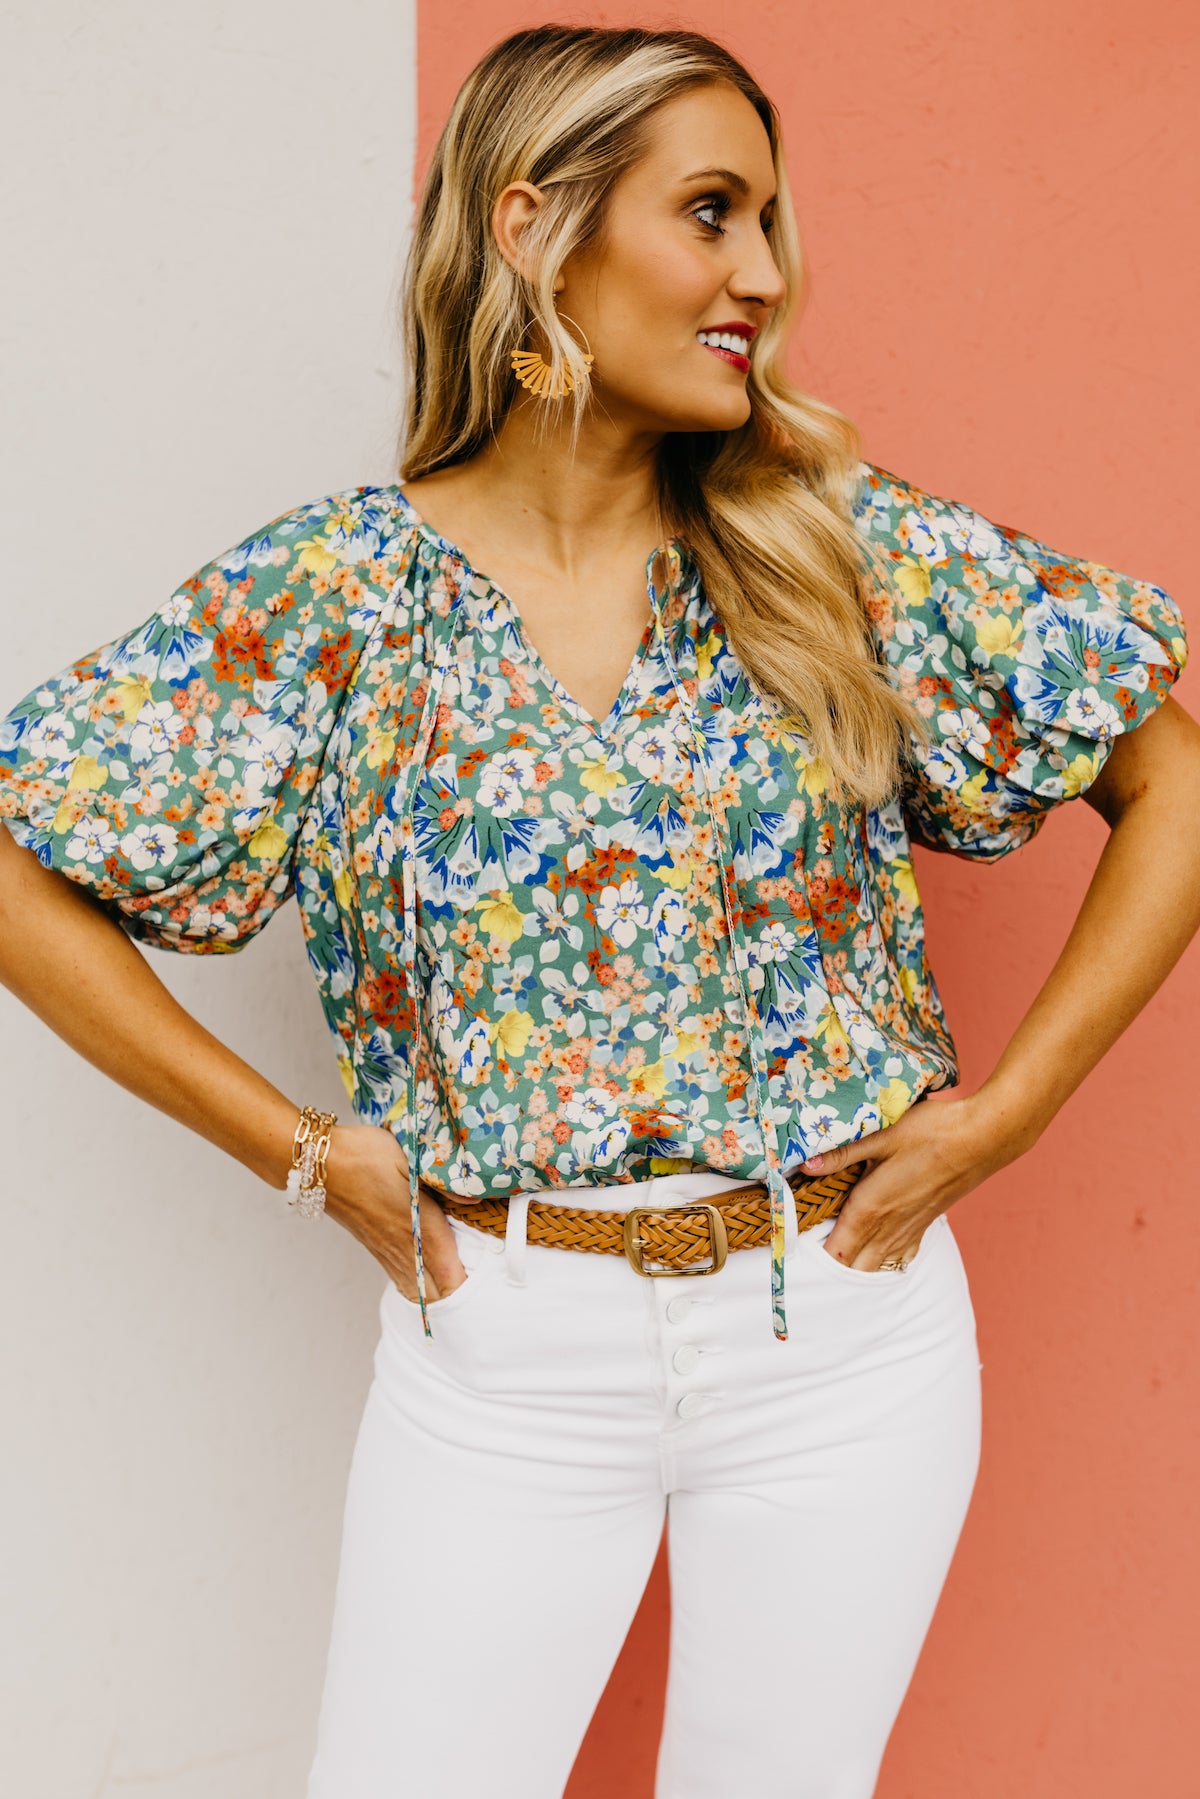 The Clementine Floral Puff Peasant Top